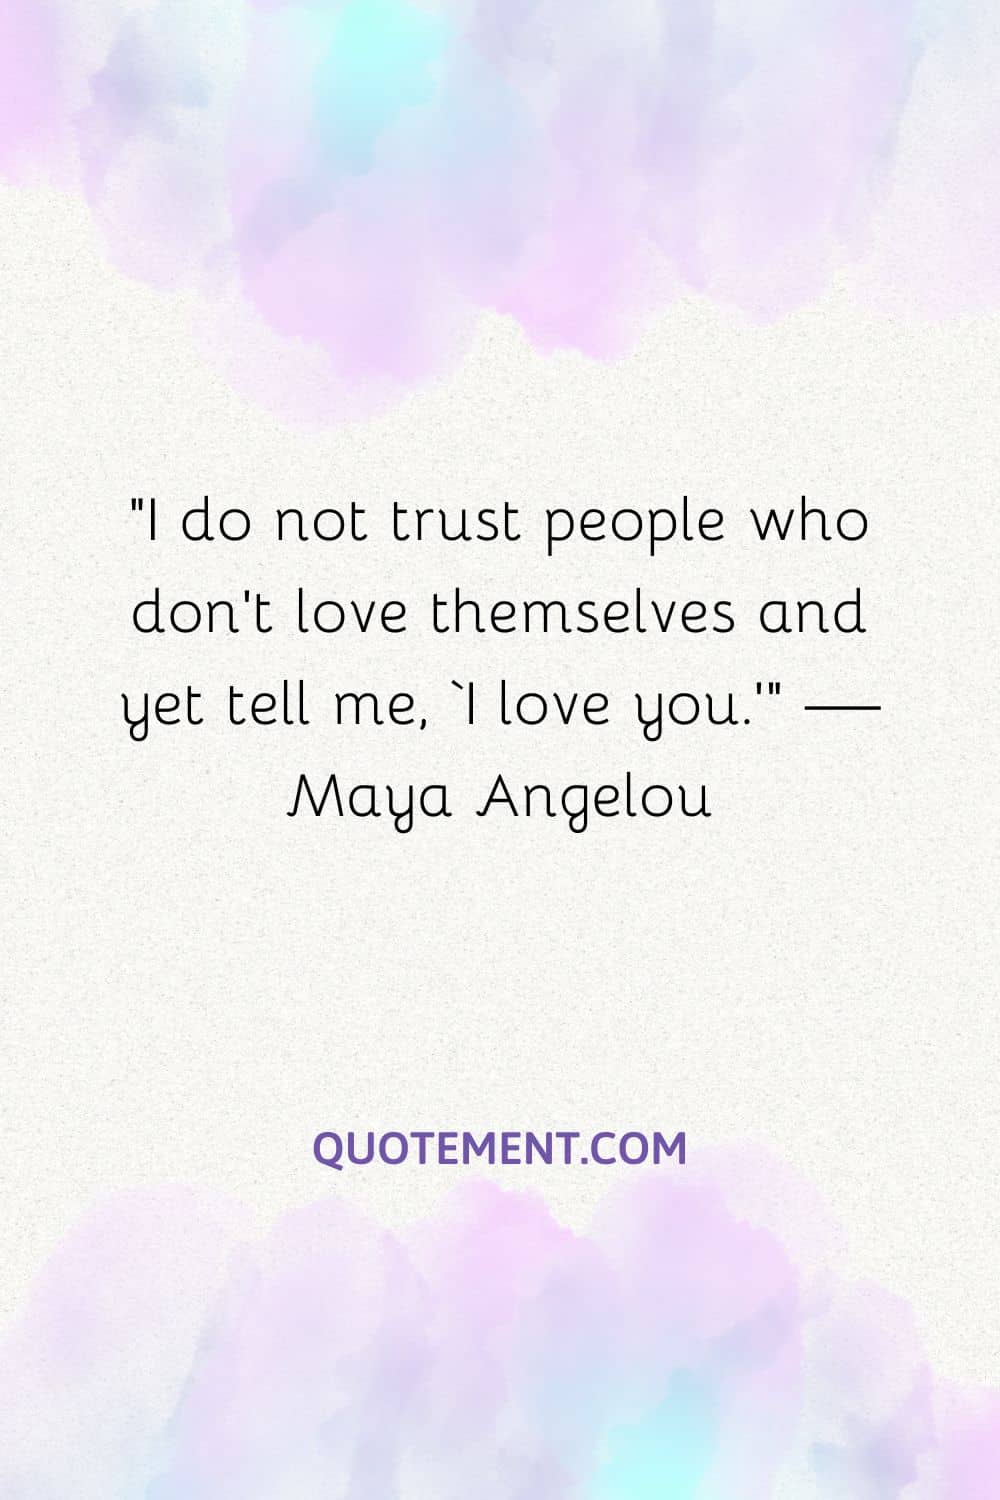 I do not trust people who don’t love themselves and yet tell me, ‘I love you